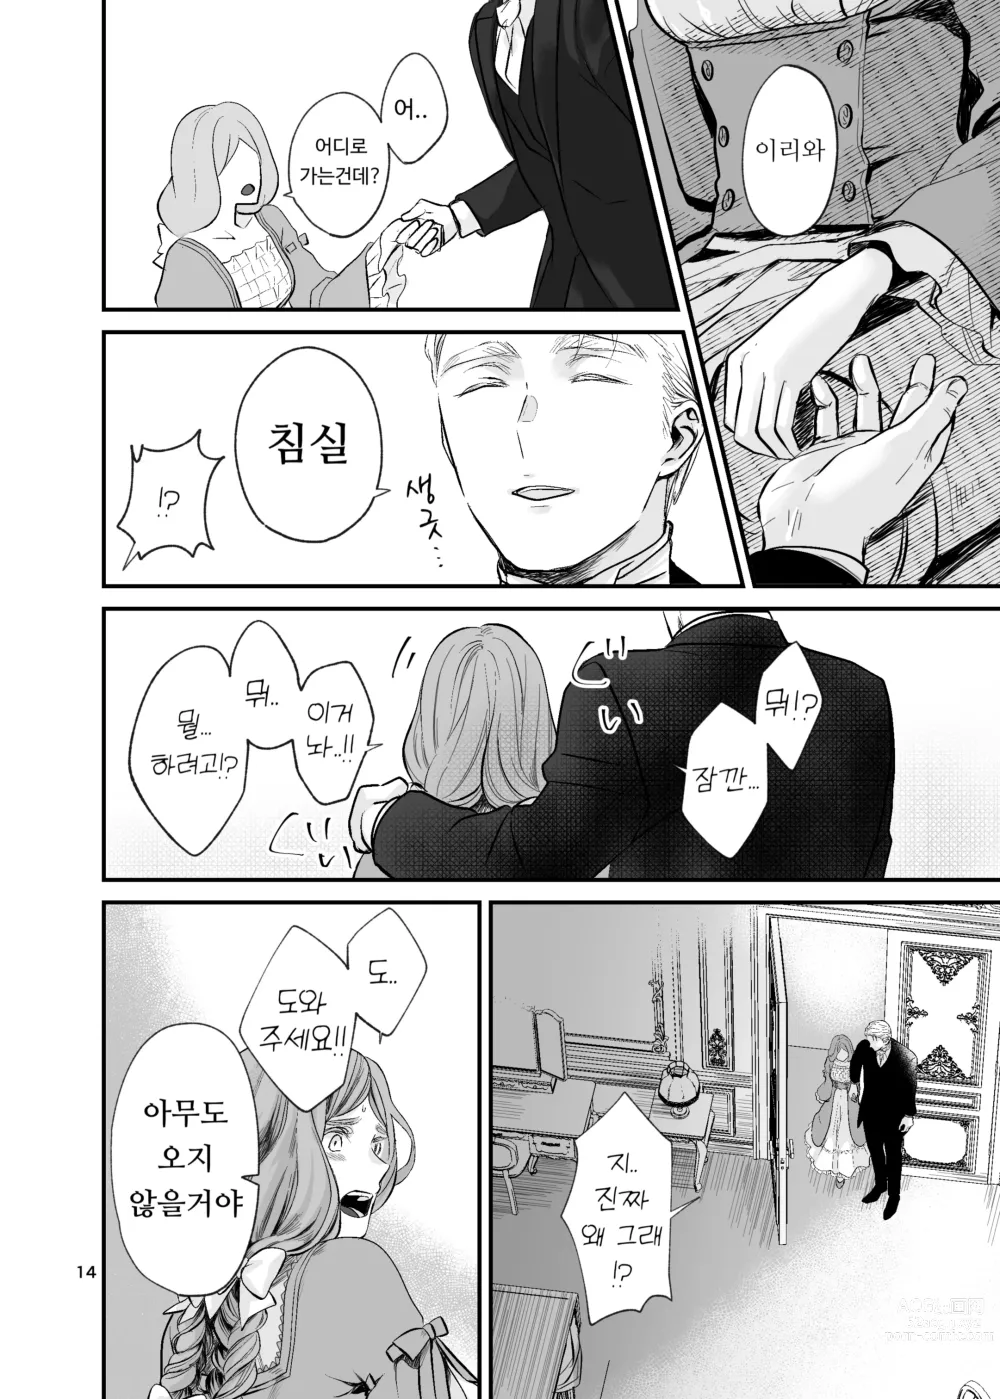 Page 14 of doujinshi 수인 영애와 혼약자